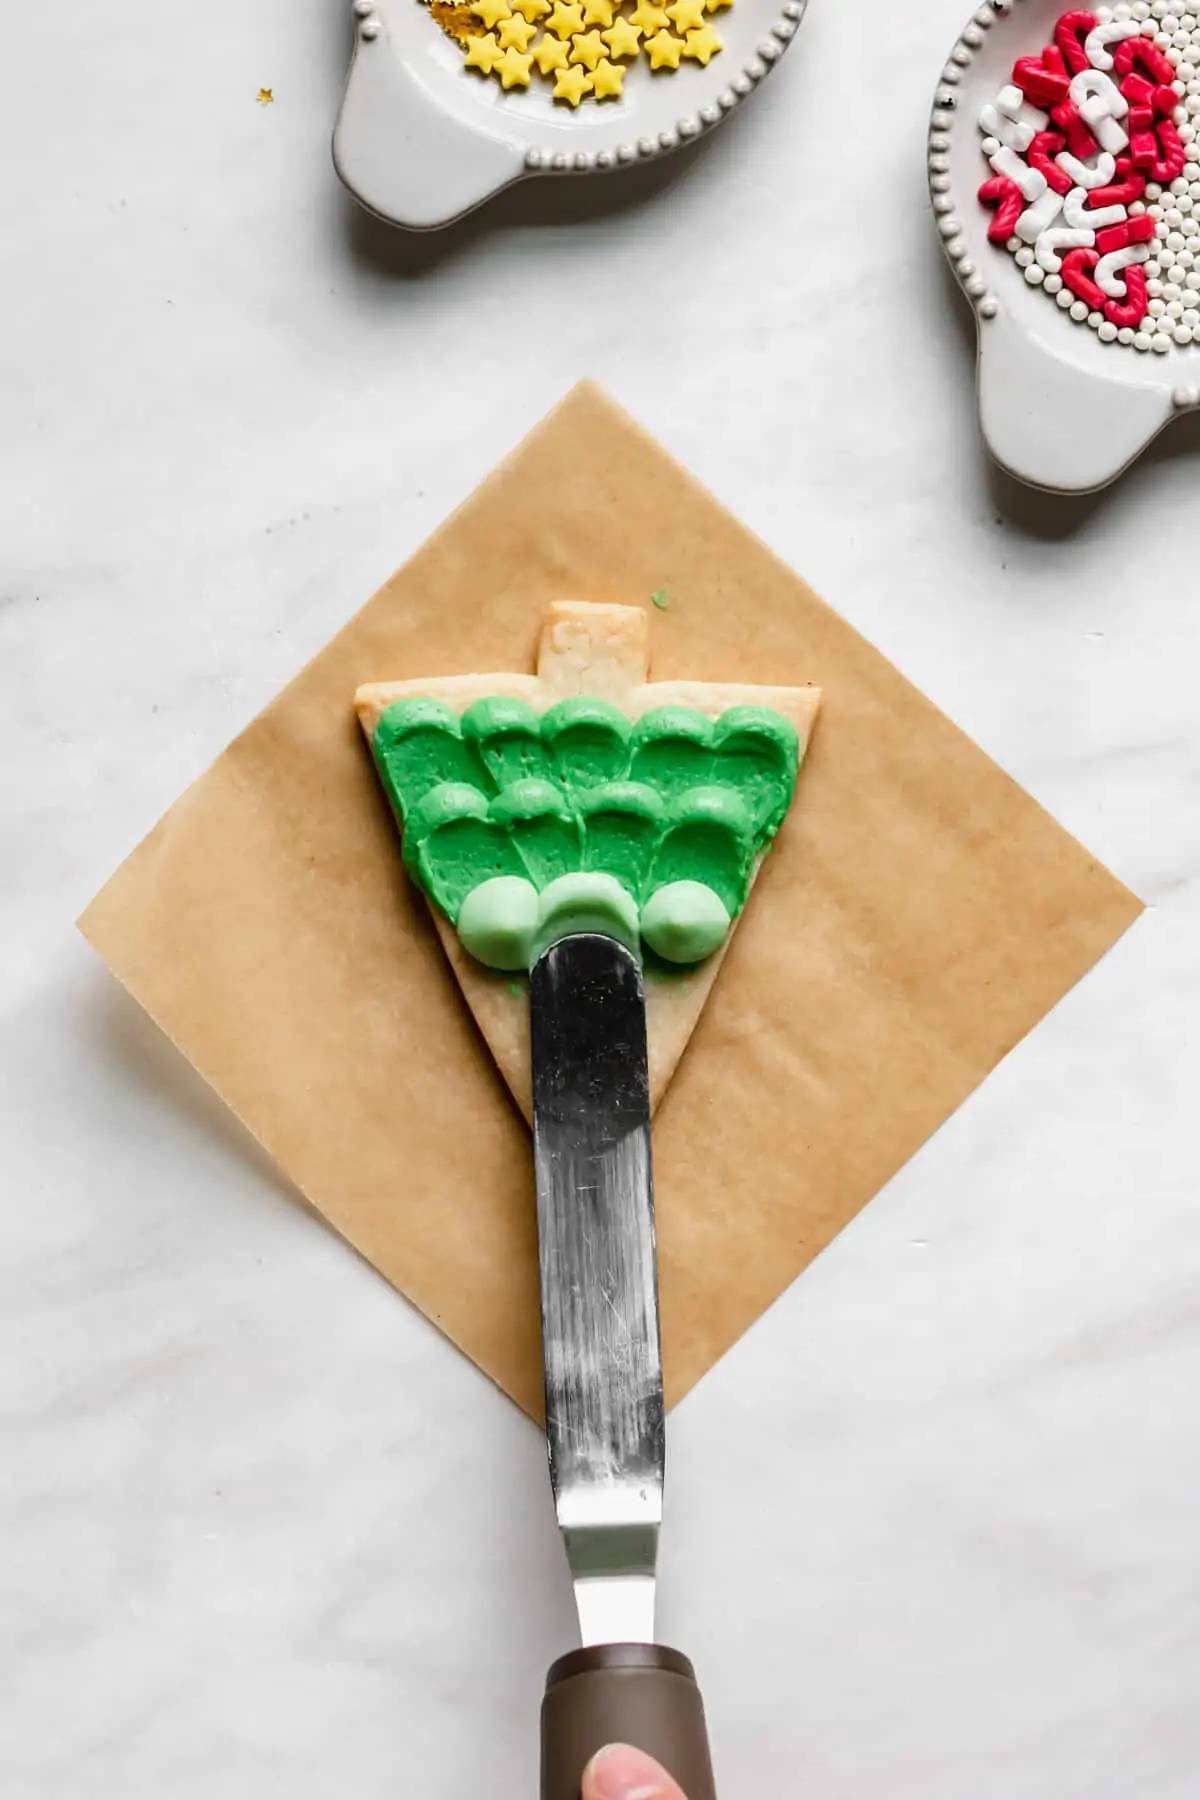 Offset spatula making the design in the icing.